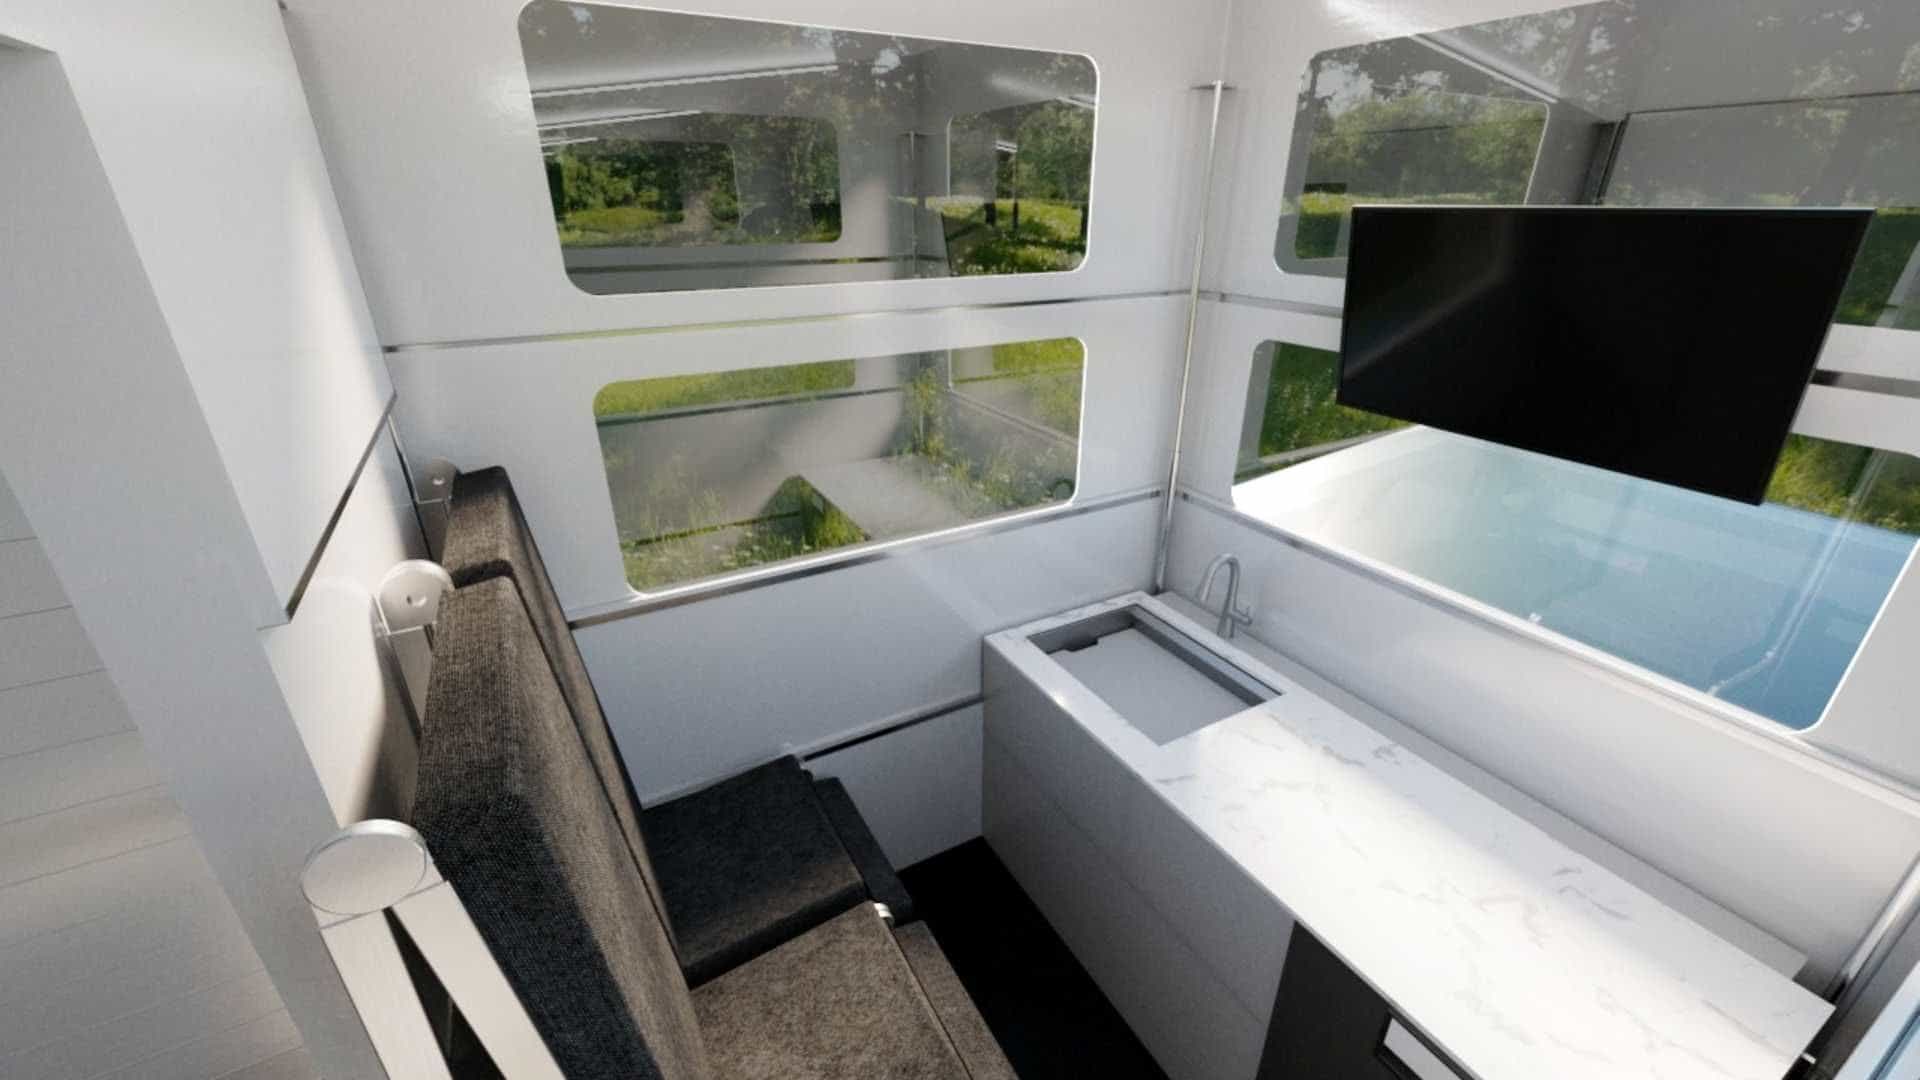 Clean, spacious interiors inside the CyberLandr Cybertruck Camper add-on